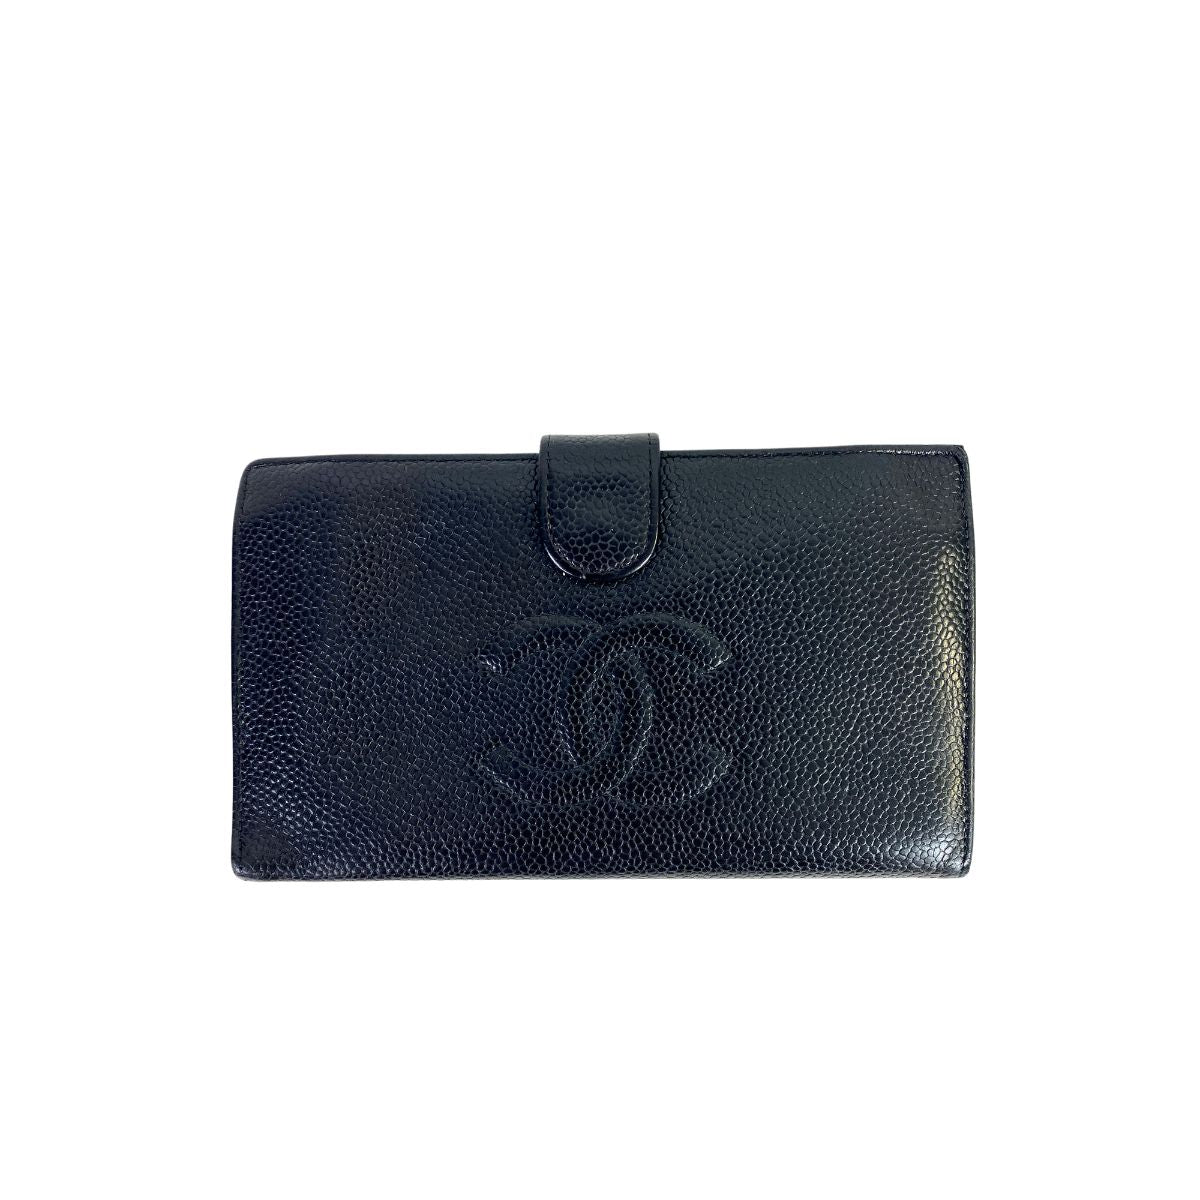 Chanel-Chanel CC Wallet Large Black in Caviar Leather-Vintage Chanel-Chanel Wallets-Etoile Luxury Vintage Amsterdam